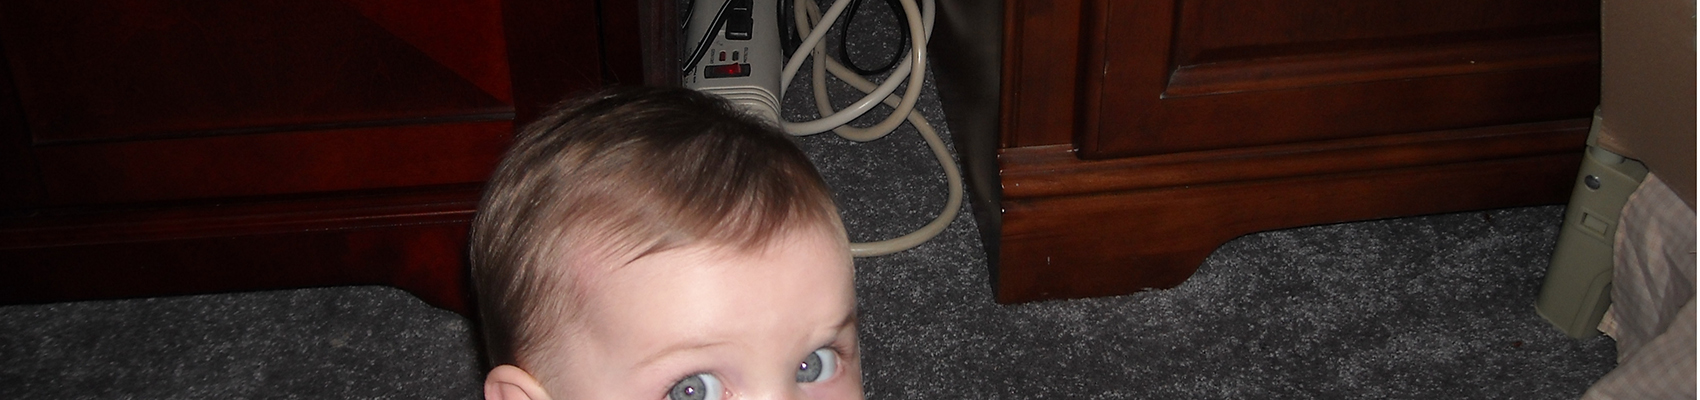 Baby and cords